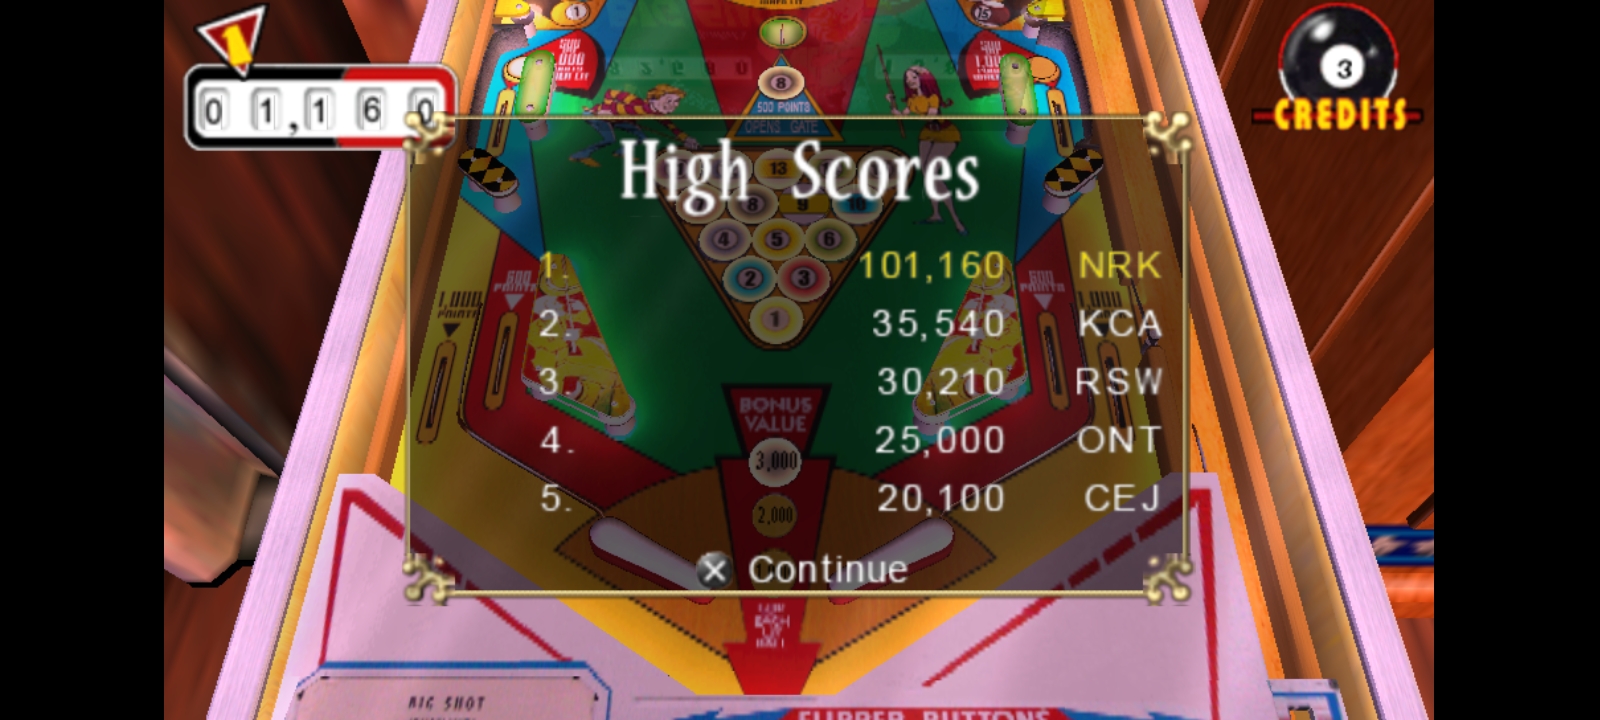 Hauntedprogram: Pinball Hall of Fame: The Gottlieb Collection: Big Shot [3 Balls] (PSP Emulated) 101,160 points on 2022-11-25 09:18:07